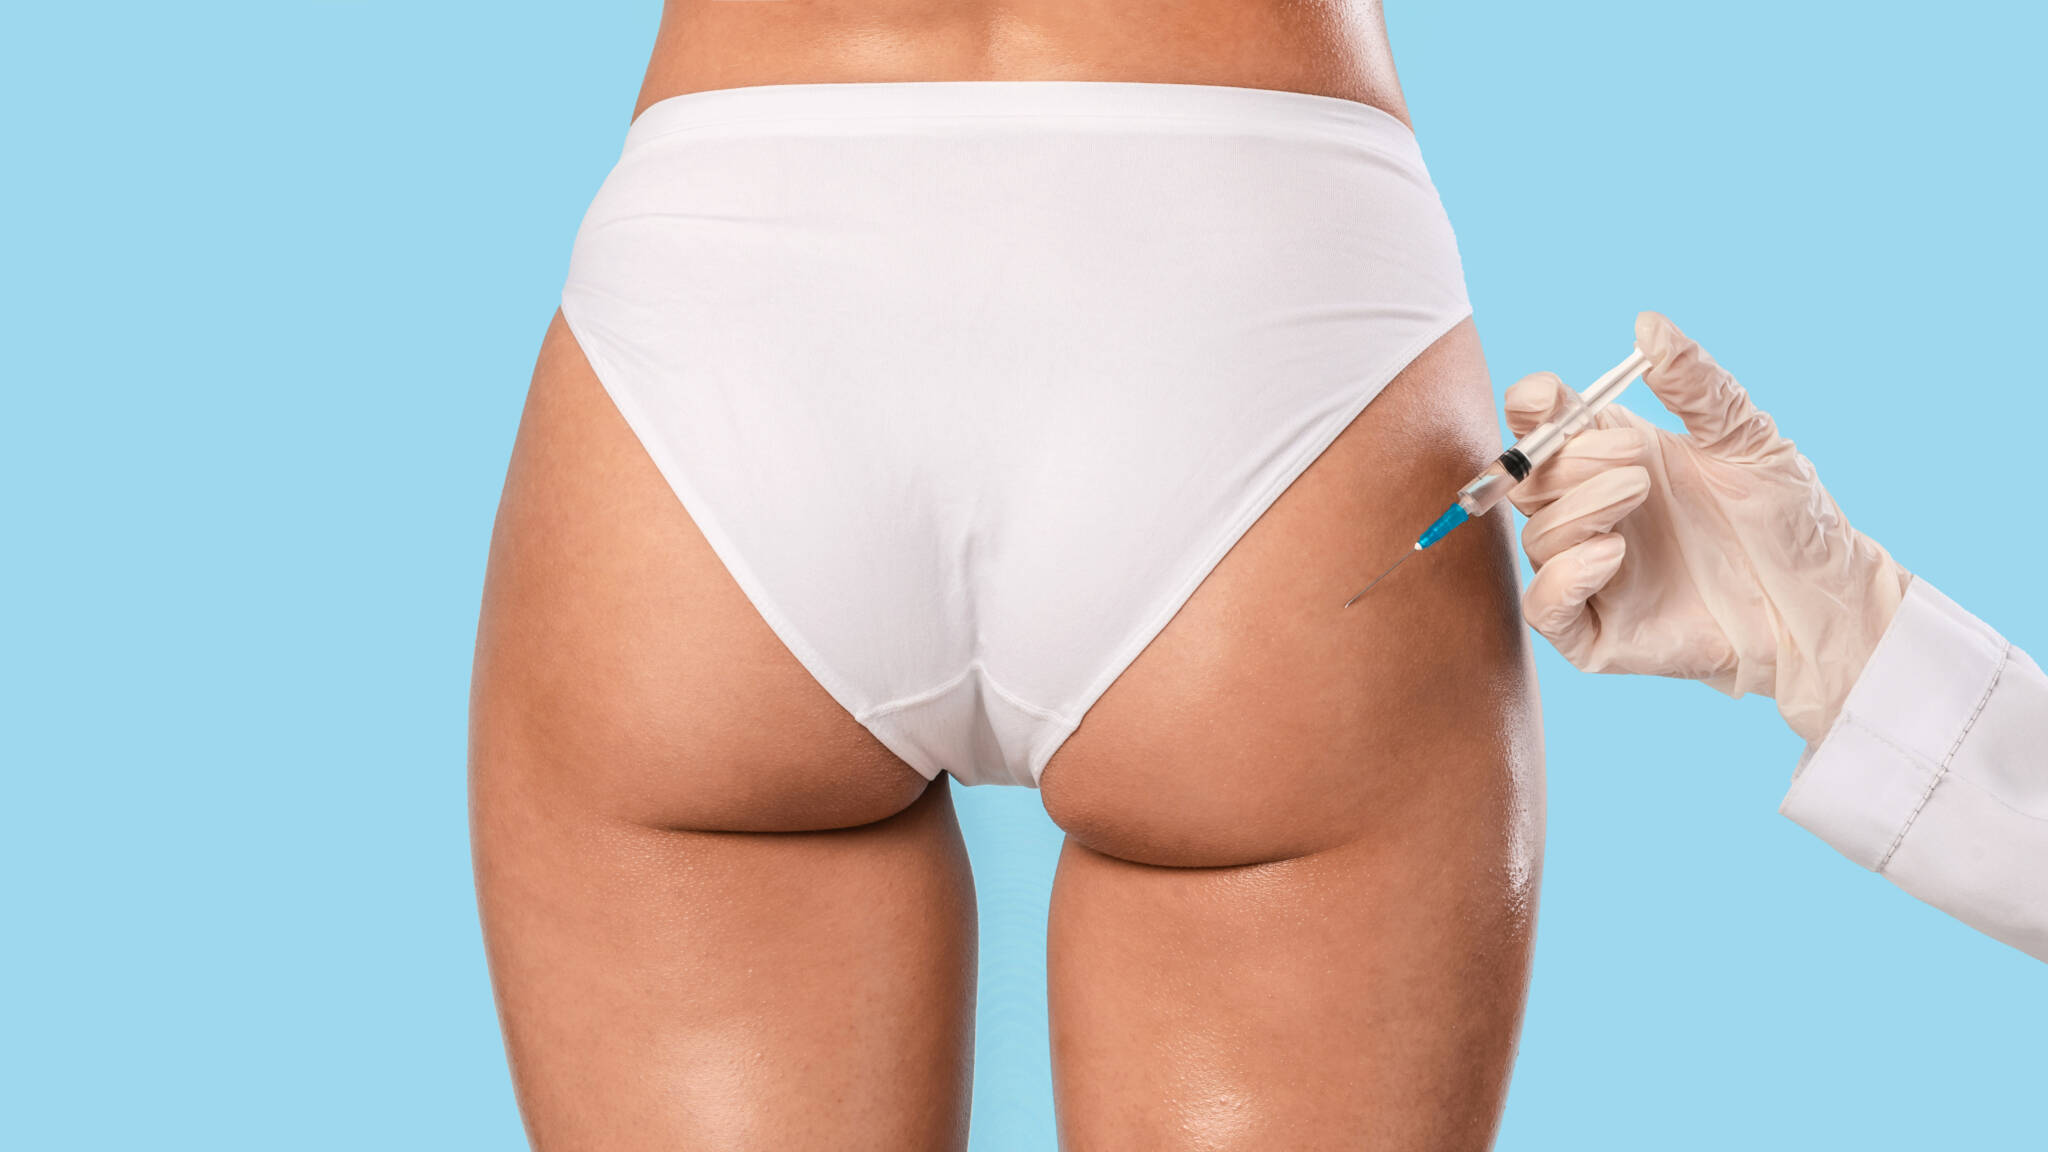 What Is the Difference Between a Buttock Lift and BBL?